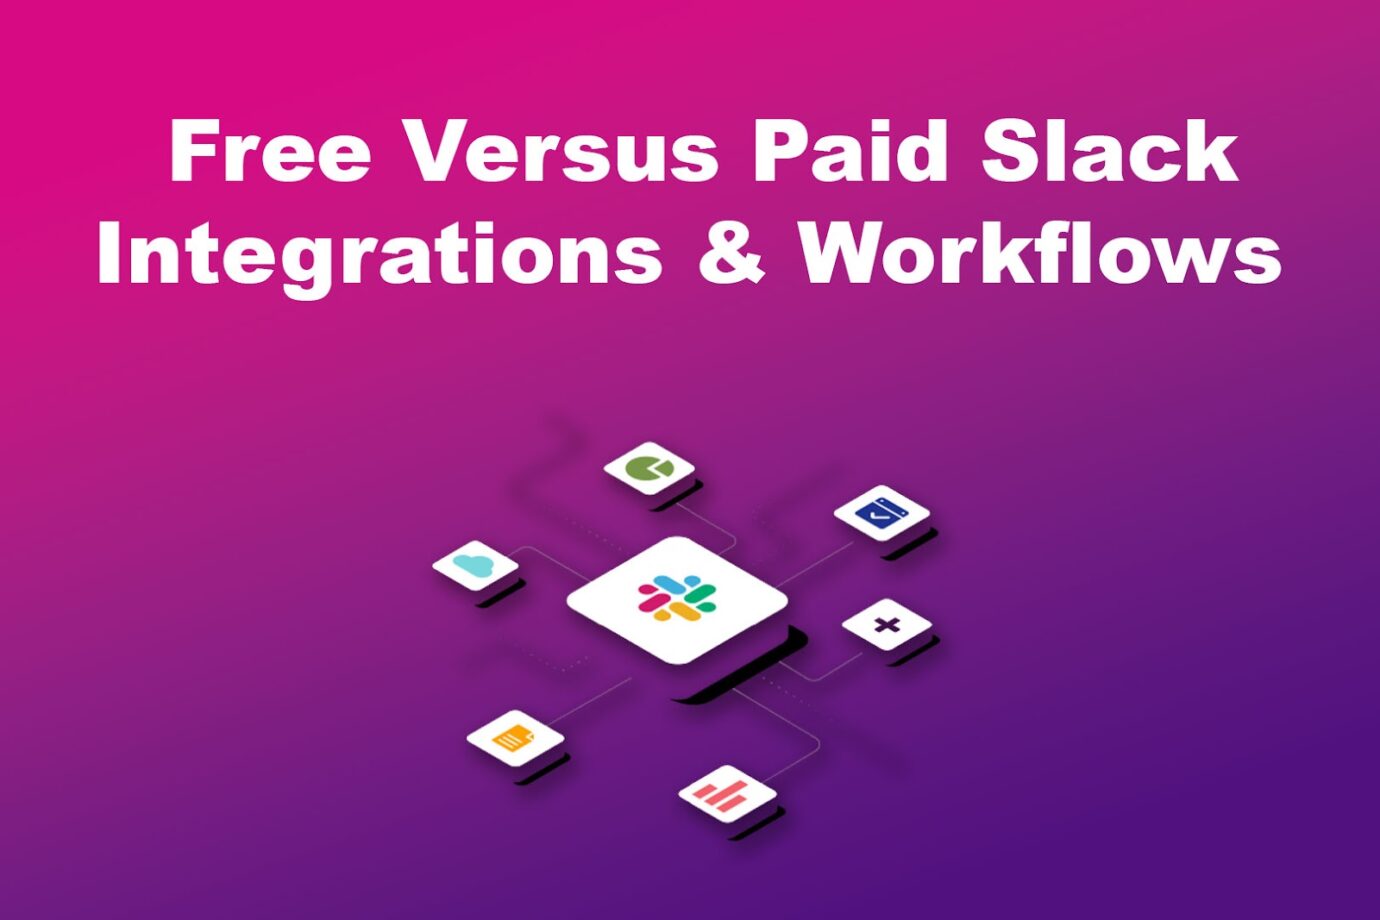 Free Versus Paid Slack Integrations and Workflows